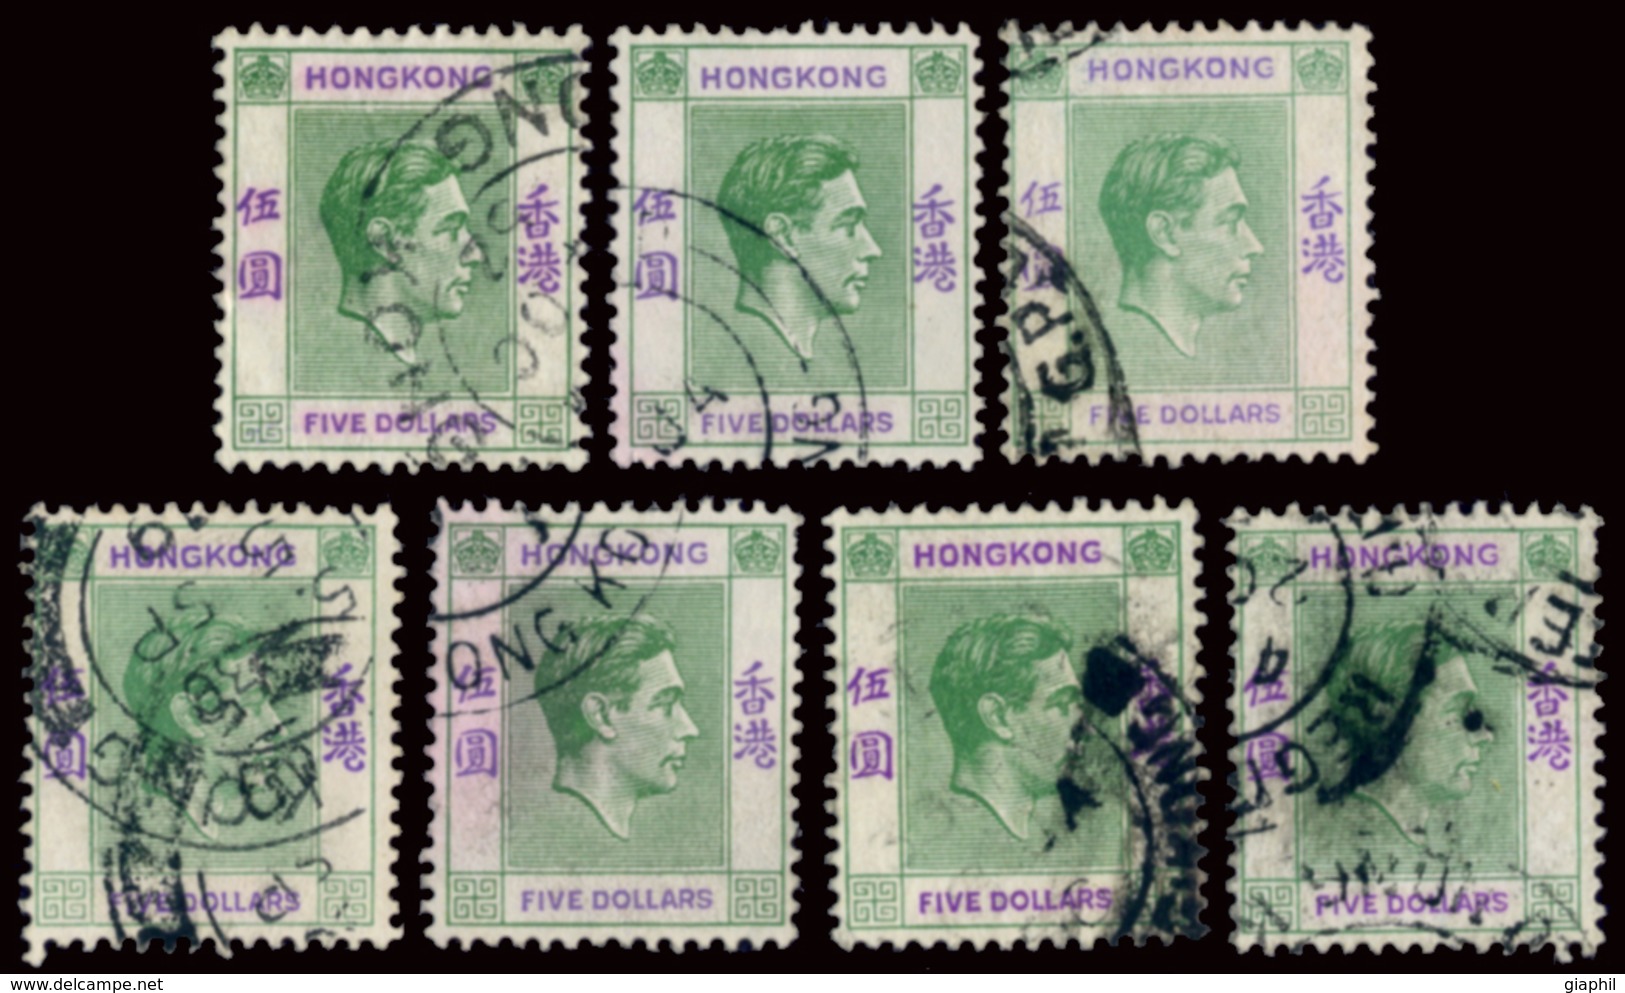 HONG KONG 1938-52 5 $ 7 EXAMPLES (SG 160) USED OFFER! - Gebraucht